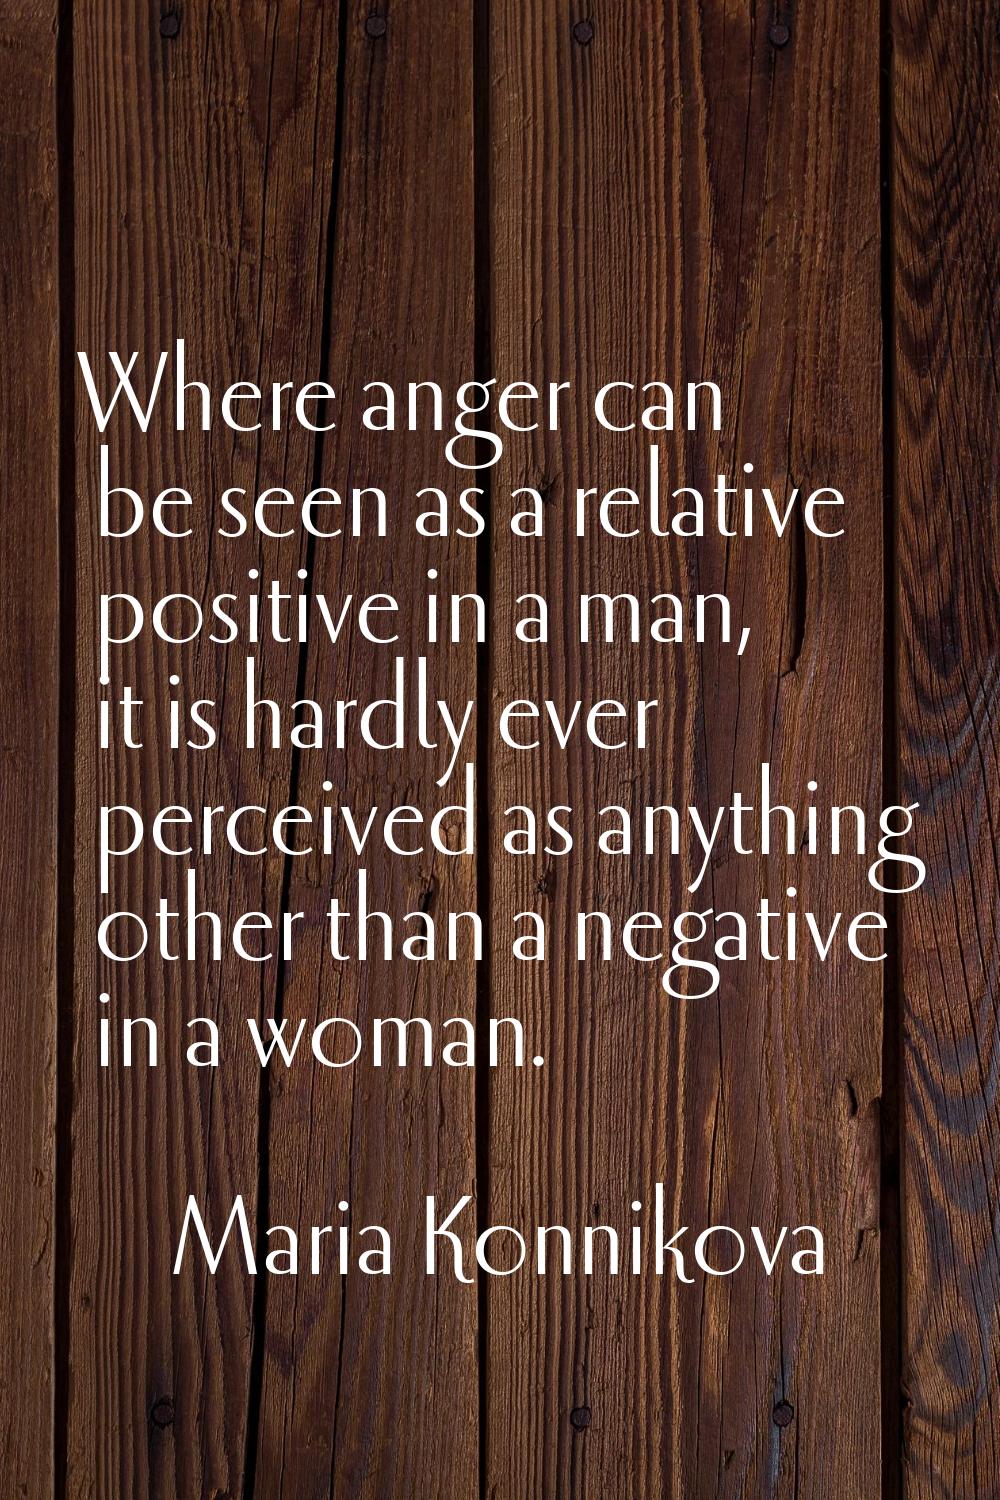 Where anger can be seen as a relative positive in a man, it is hardly ever perceived as anything ot